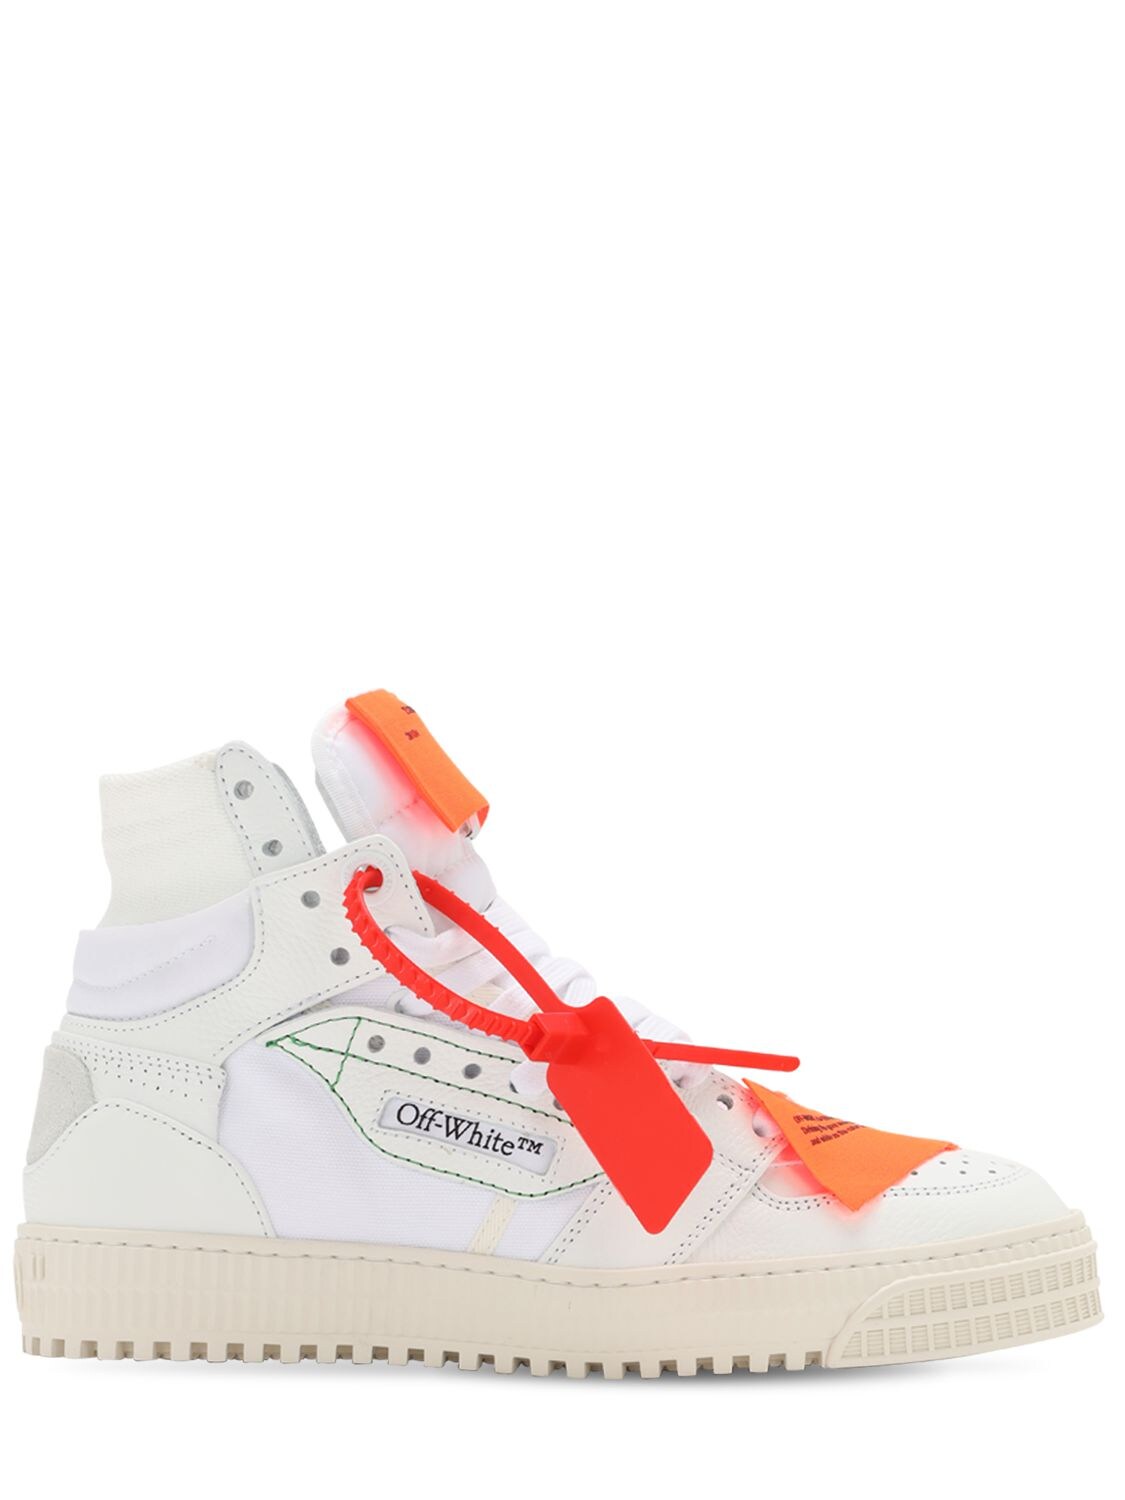 OFF-WHITE 20MM 3.0 LEATHER & MESH HIGH TOP SNEAKER,72ILOF003-MDEWMA2